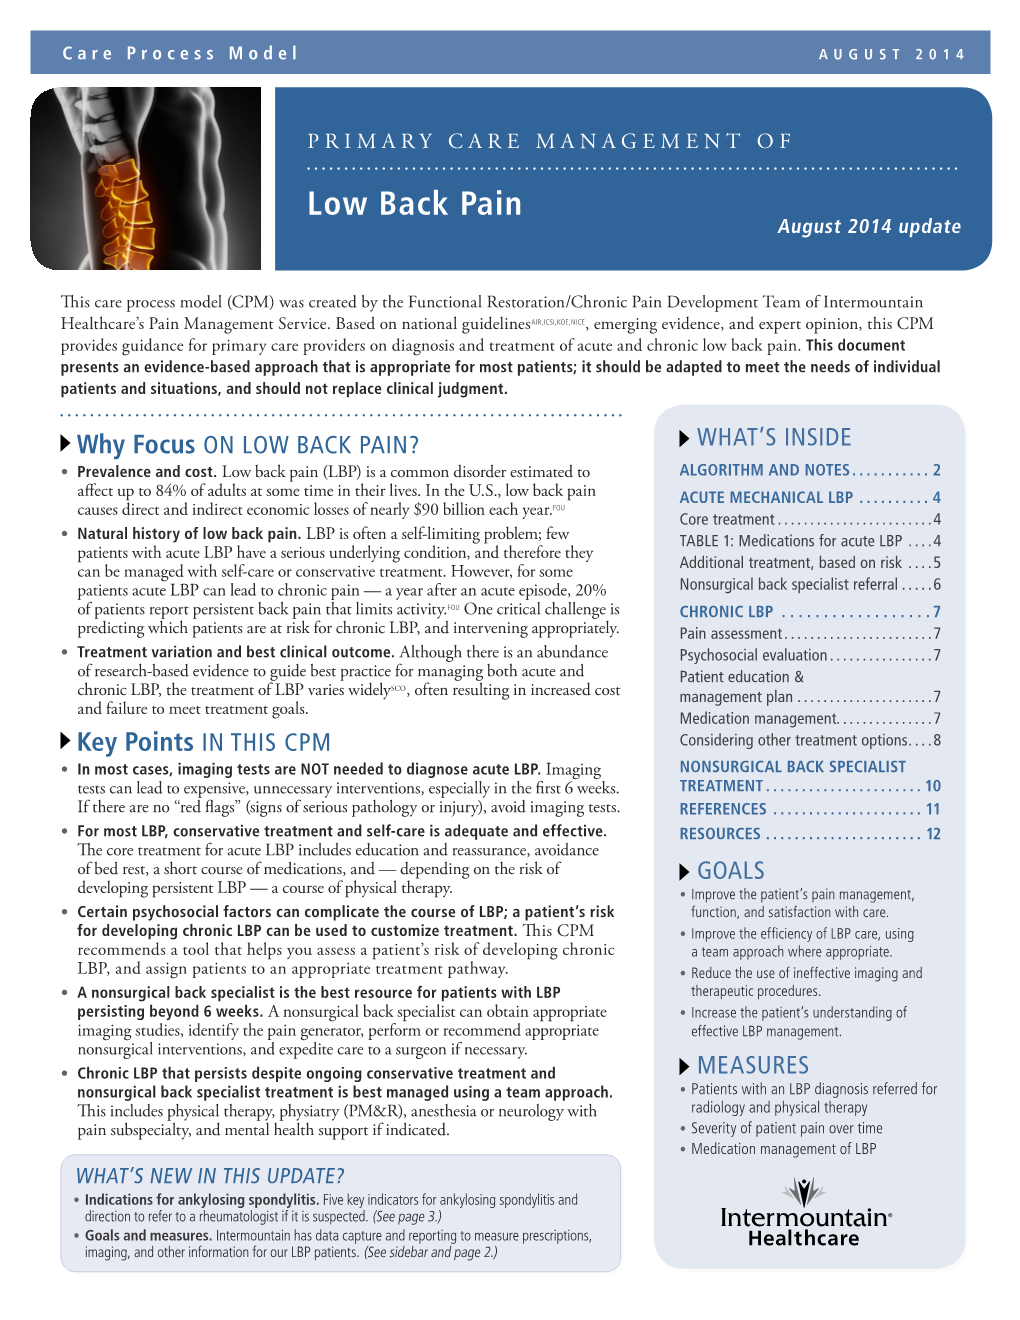 Low Back Pain August 2014 Update